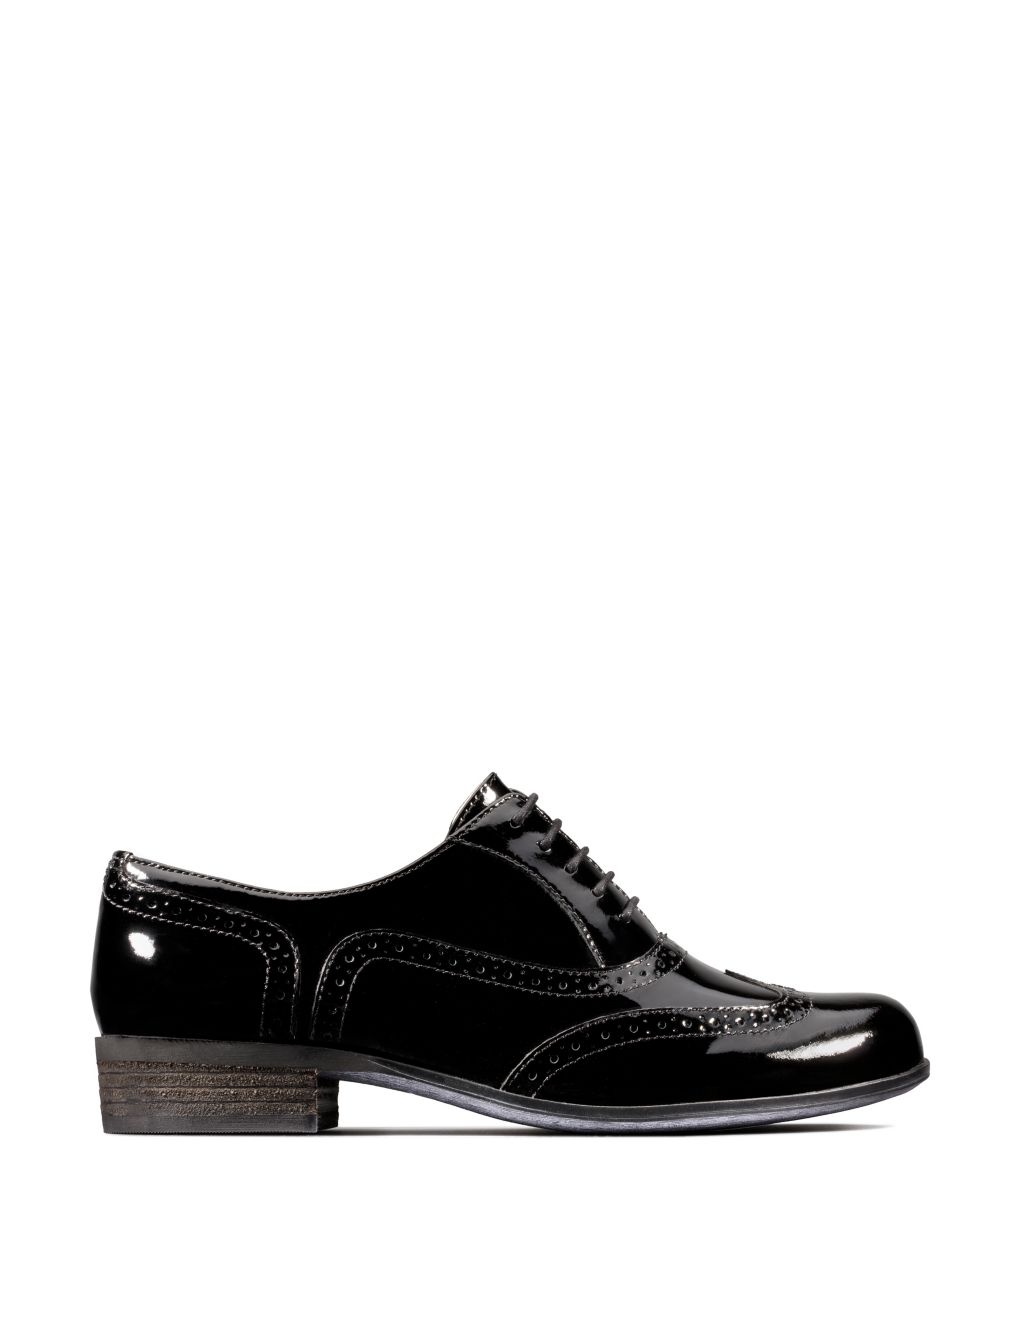 Leather Patent Lace Up Brogues image 1